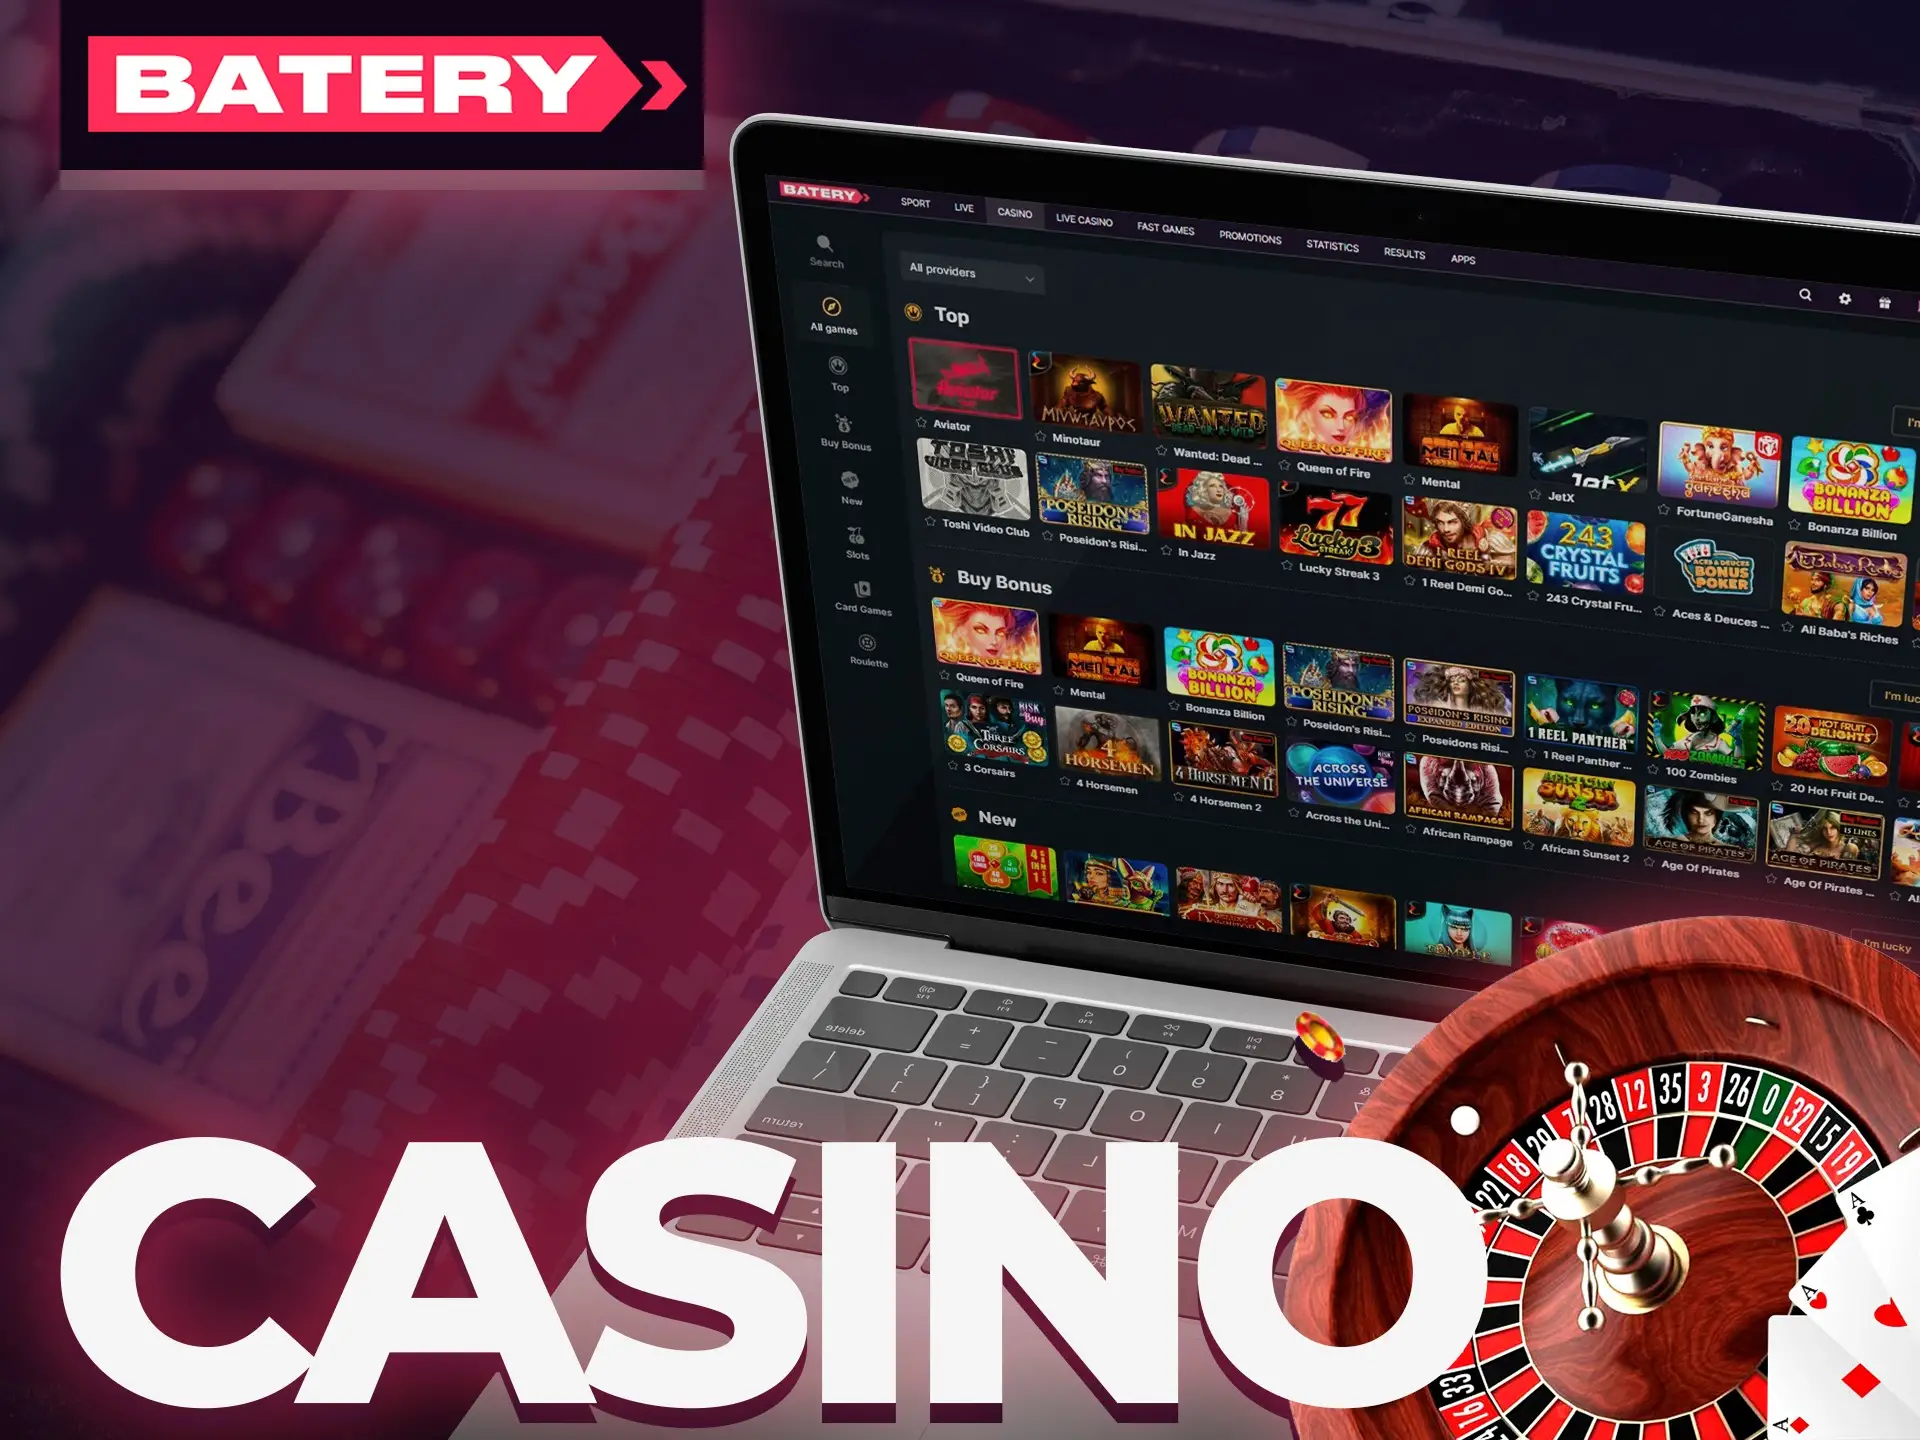 Play at Batery Casino and have fun.